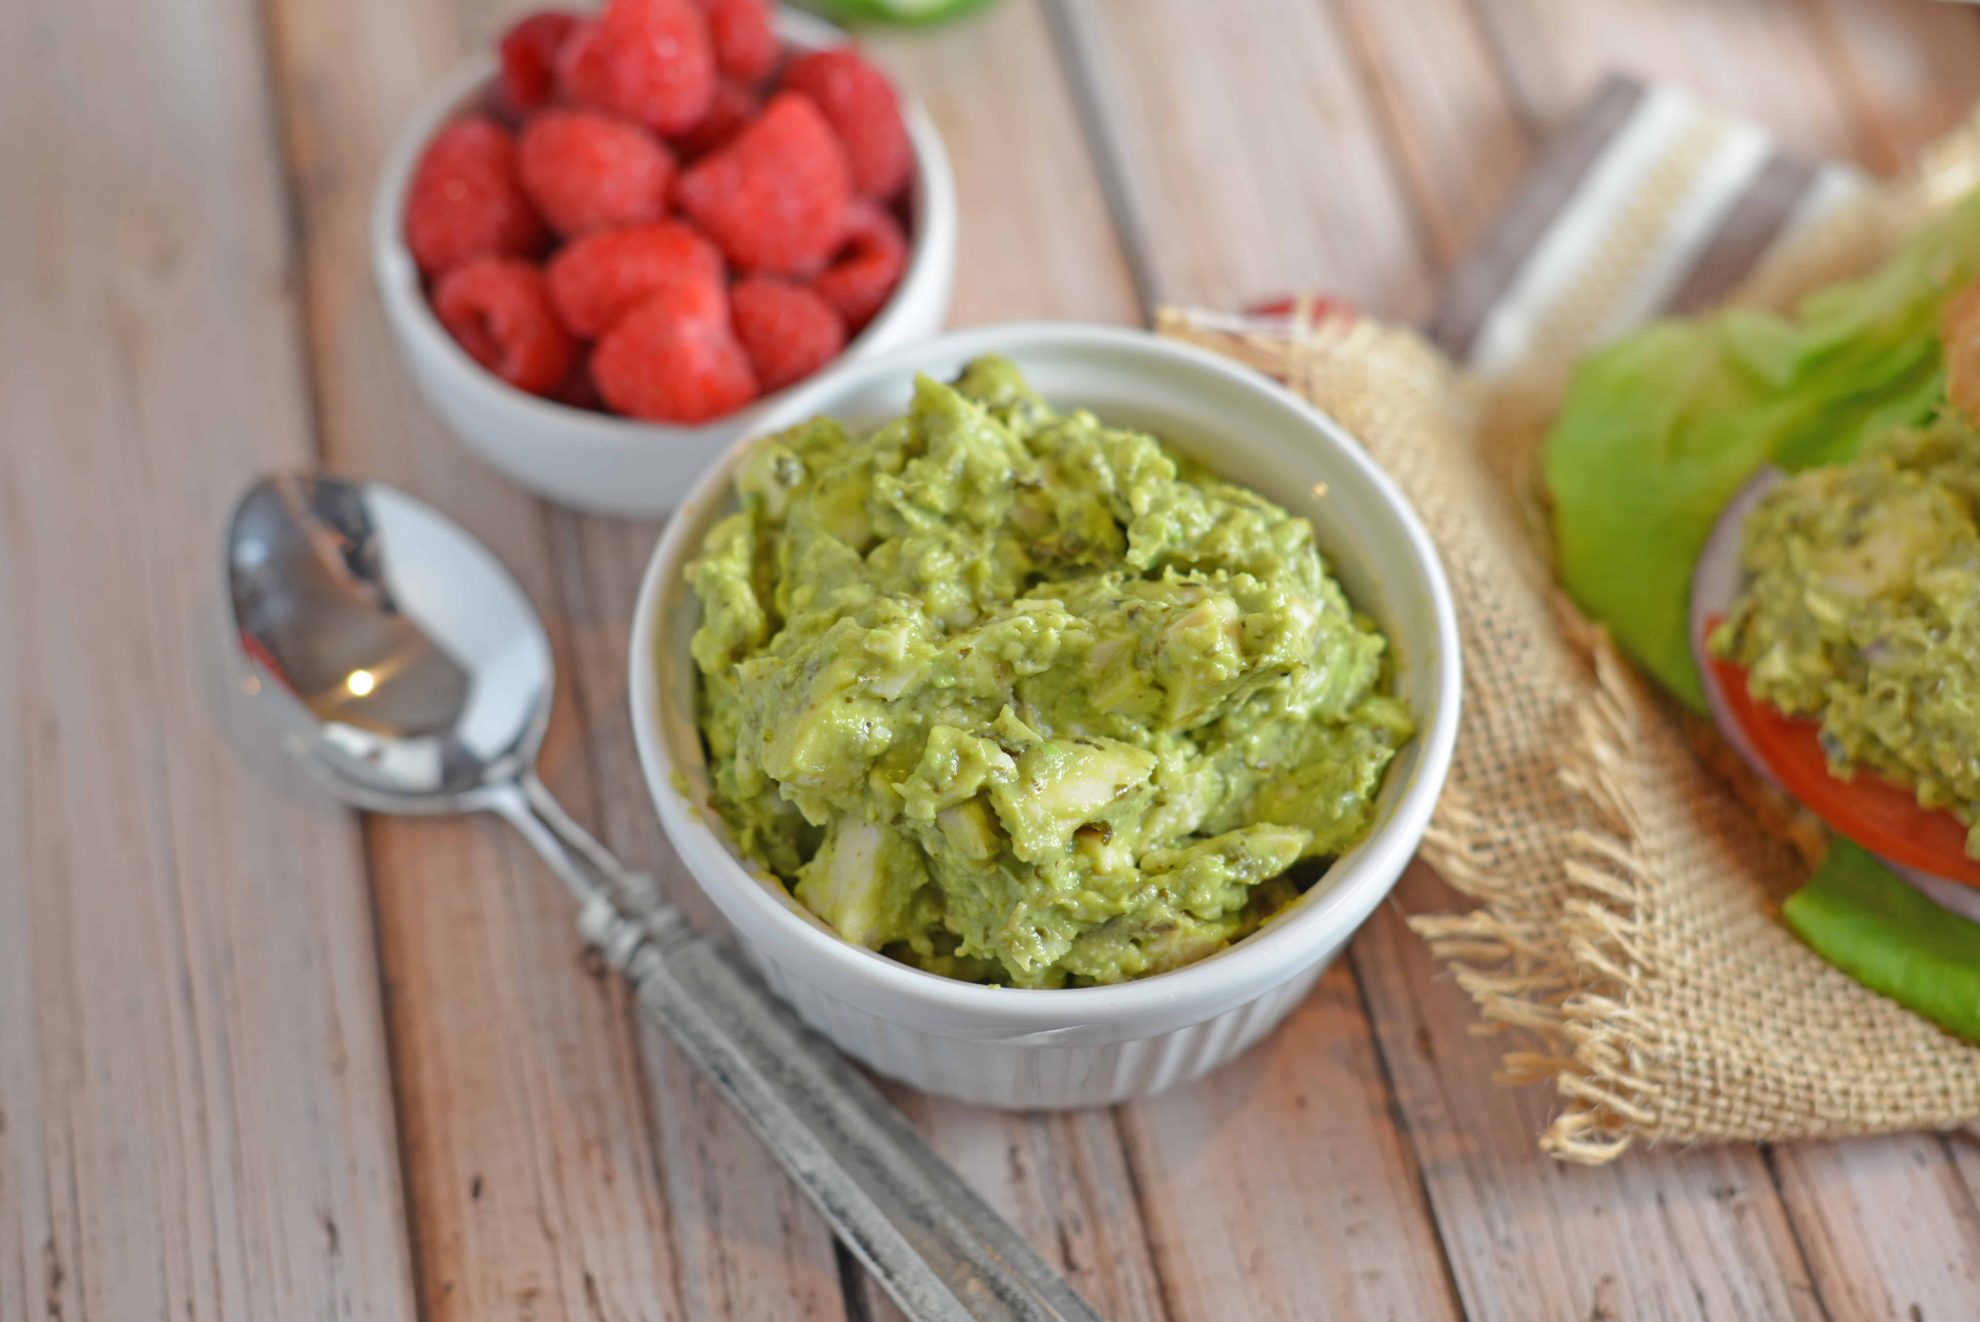 Pesto Avocado Chicken Salad swaps out the heavy mayonnaise for creamy avocado. Pesto adds flavor and lime juice brightens shredded chicken from precooked rotisserie chicken. #healthychickensalad #avocadochickensalad #easychickensalad www.savoryexperiments.com